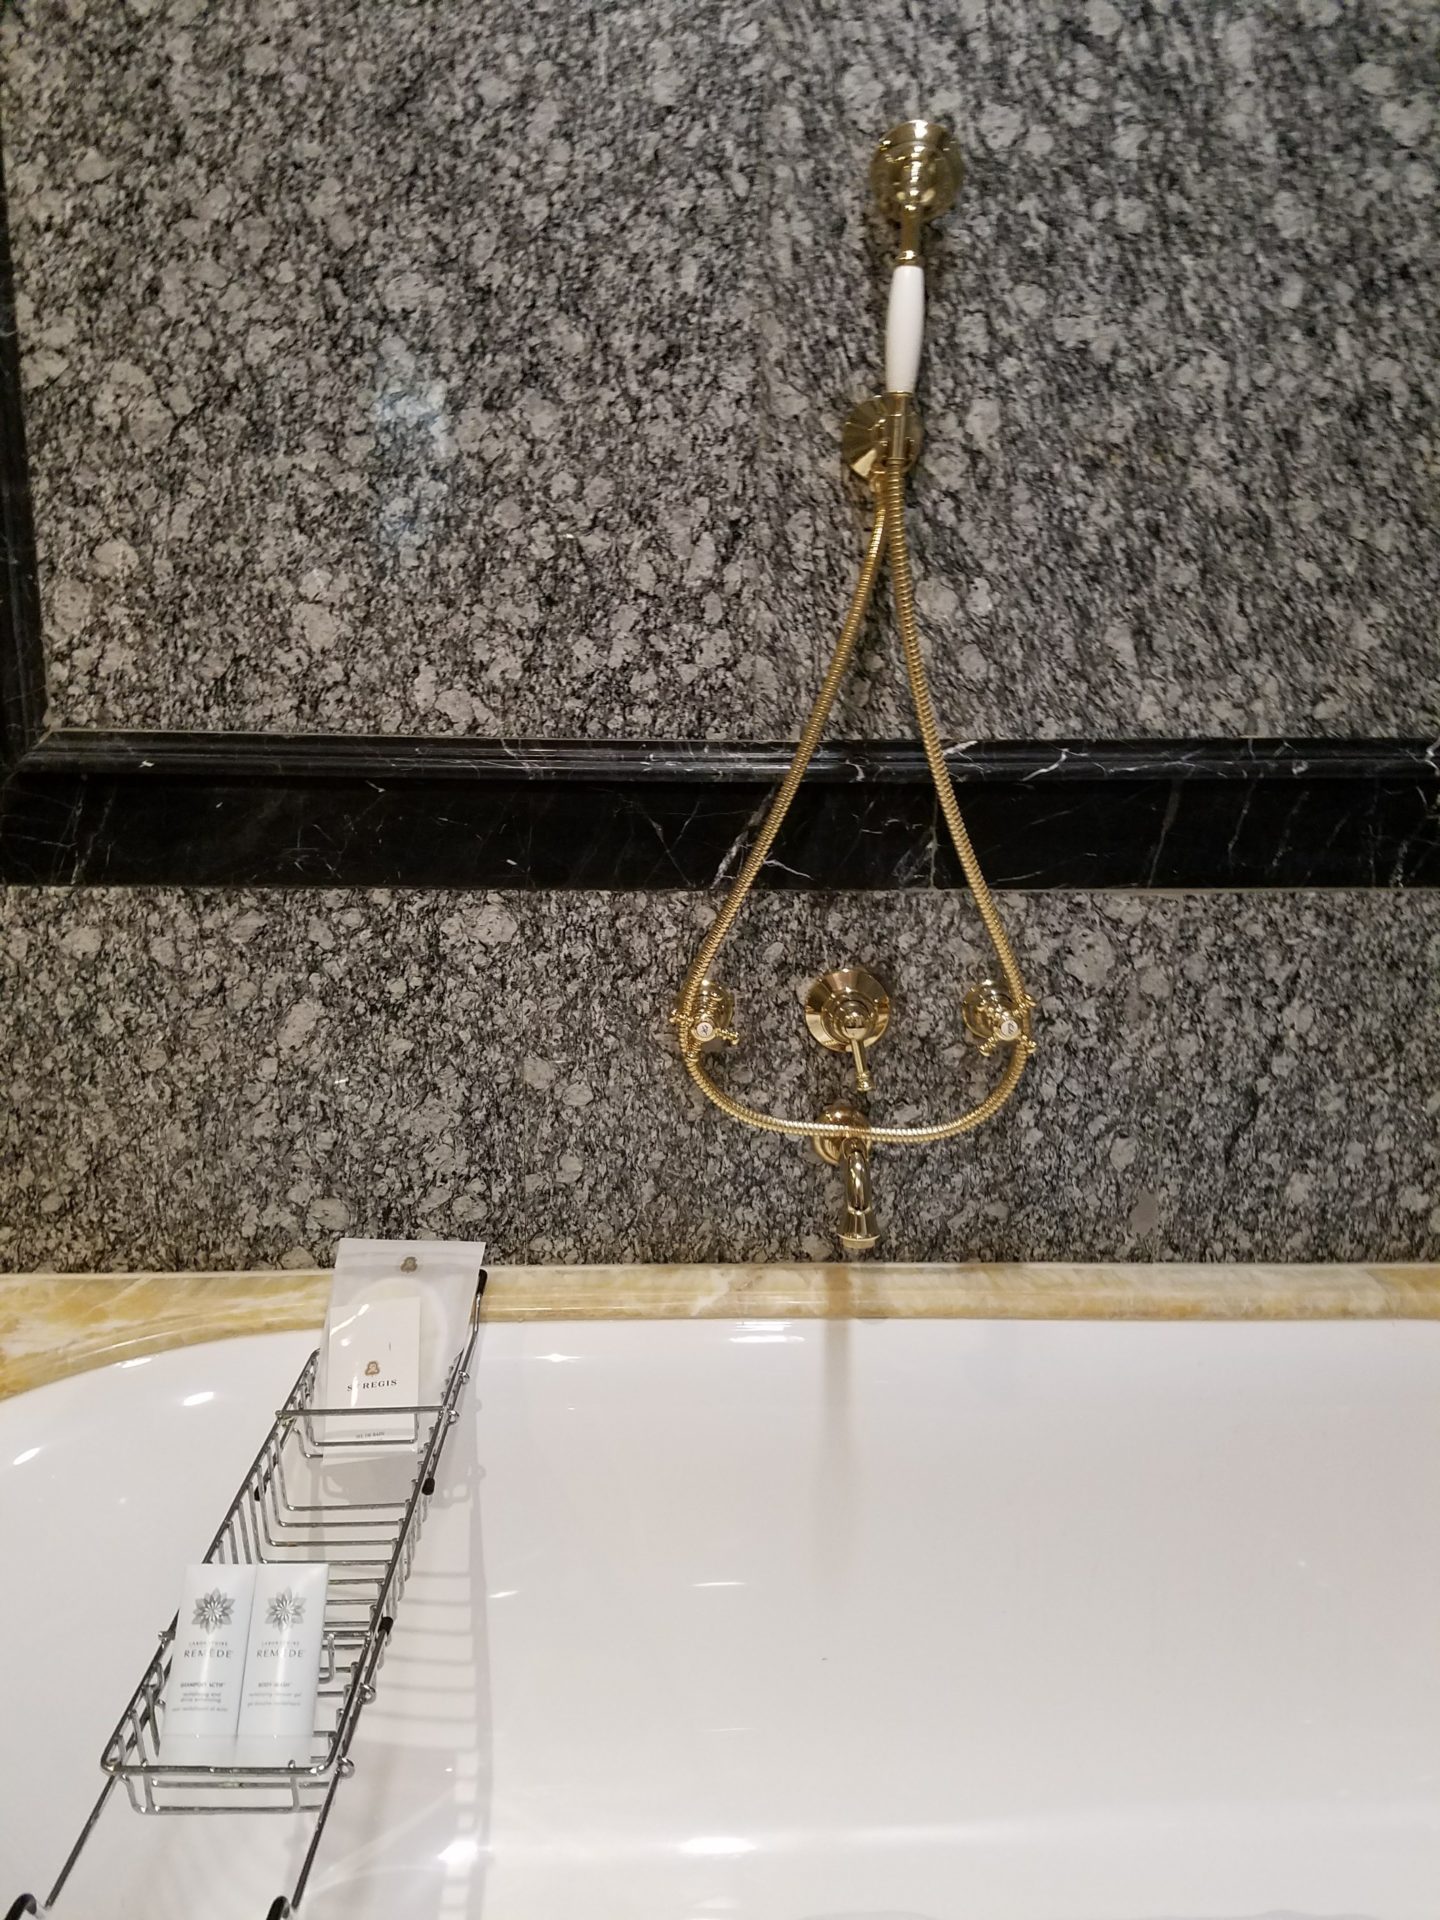 a bathtub with a gold rope from it